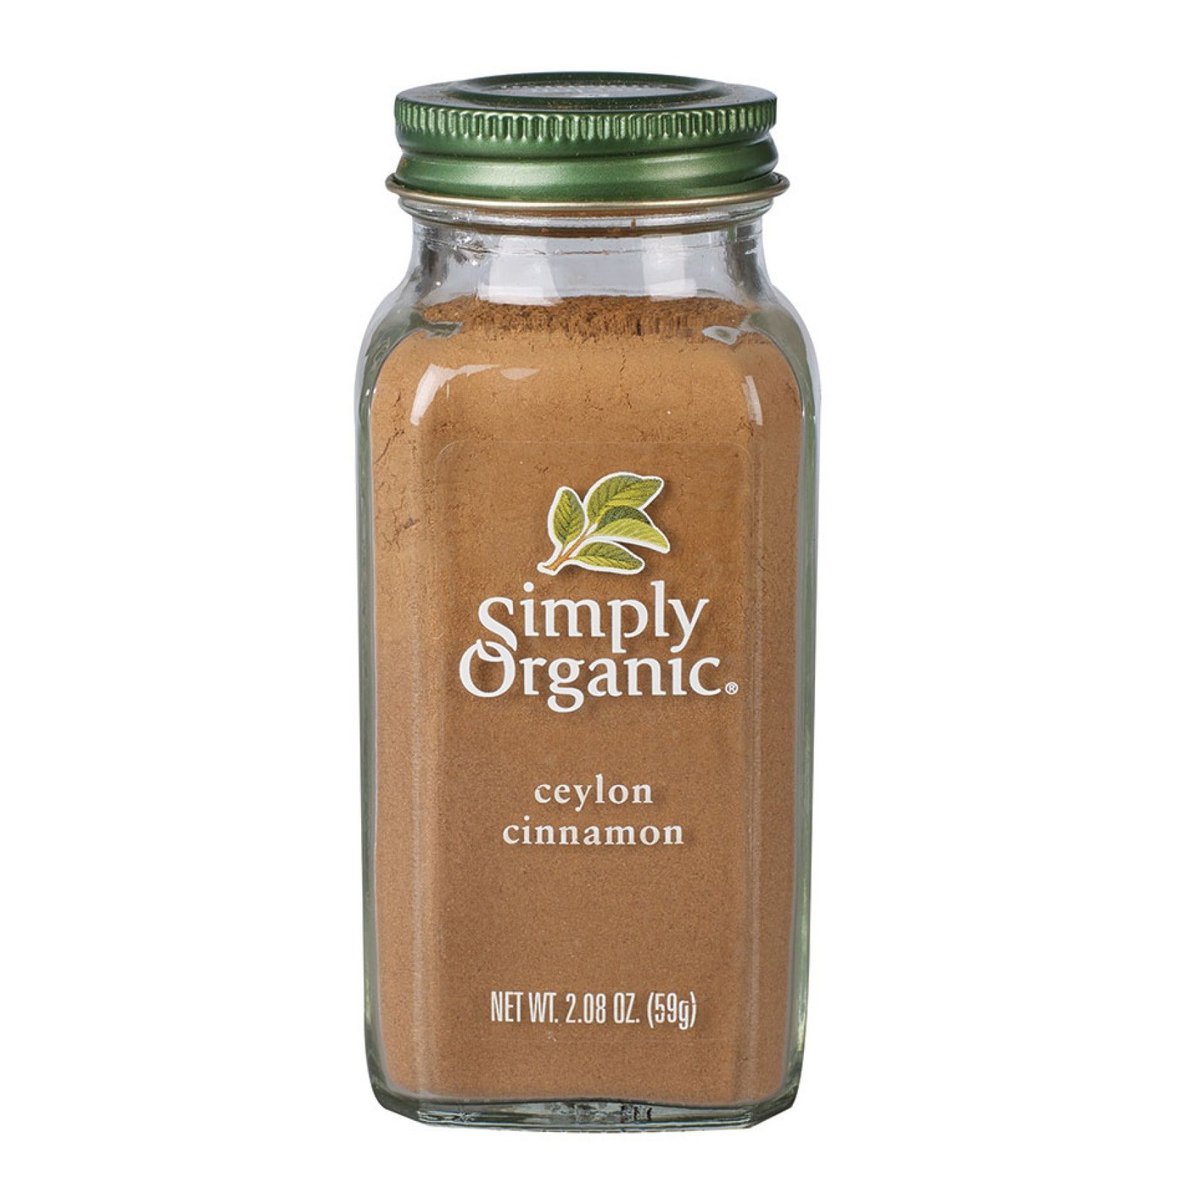 Simply organic cinnamon and chai spices in a jar.